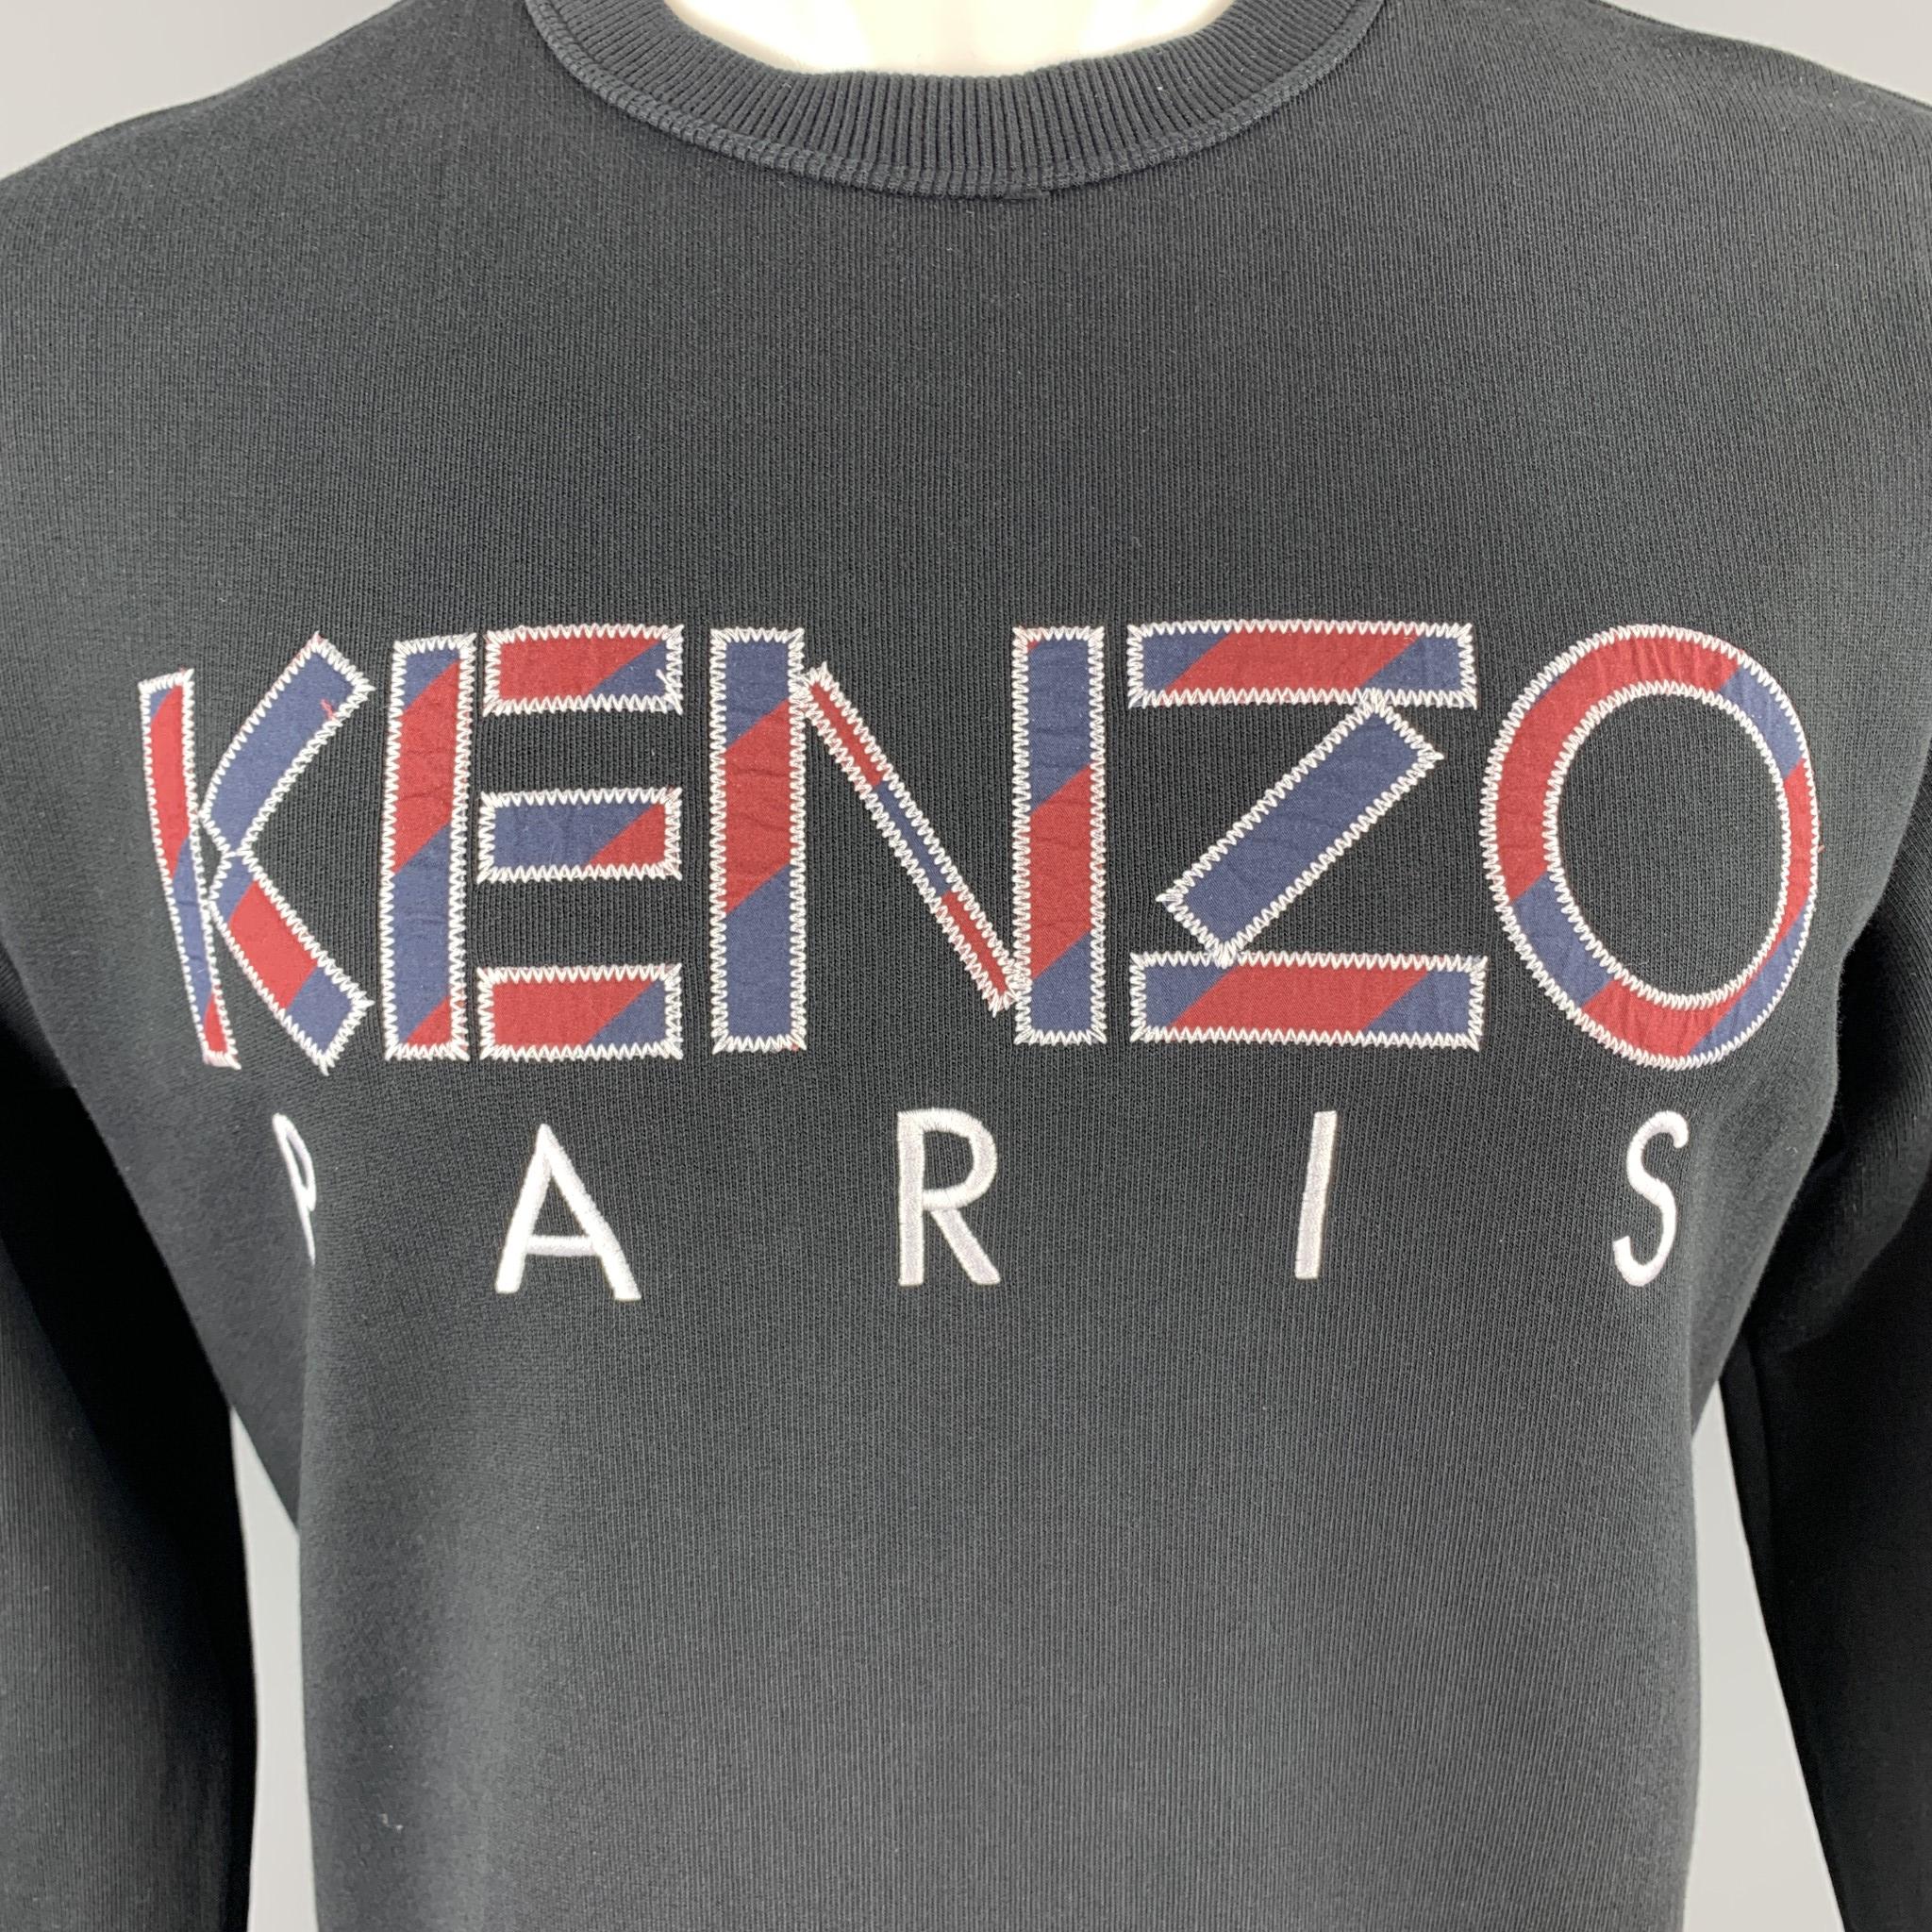 KENZO pullover comes in black jersey with a navy and burgundy embroidered logo graphic. Made in Portugal. 

Excellent Pre-Owned Condition.
Marked: M

Measurements:

Shoulder: 18 in.
Chest: 42 in.
Sleeve: 25 in.
Length: 25 in.